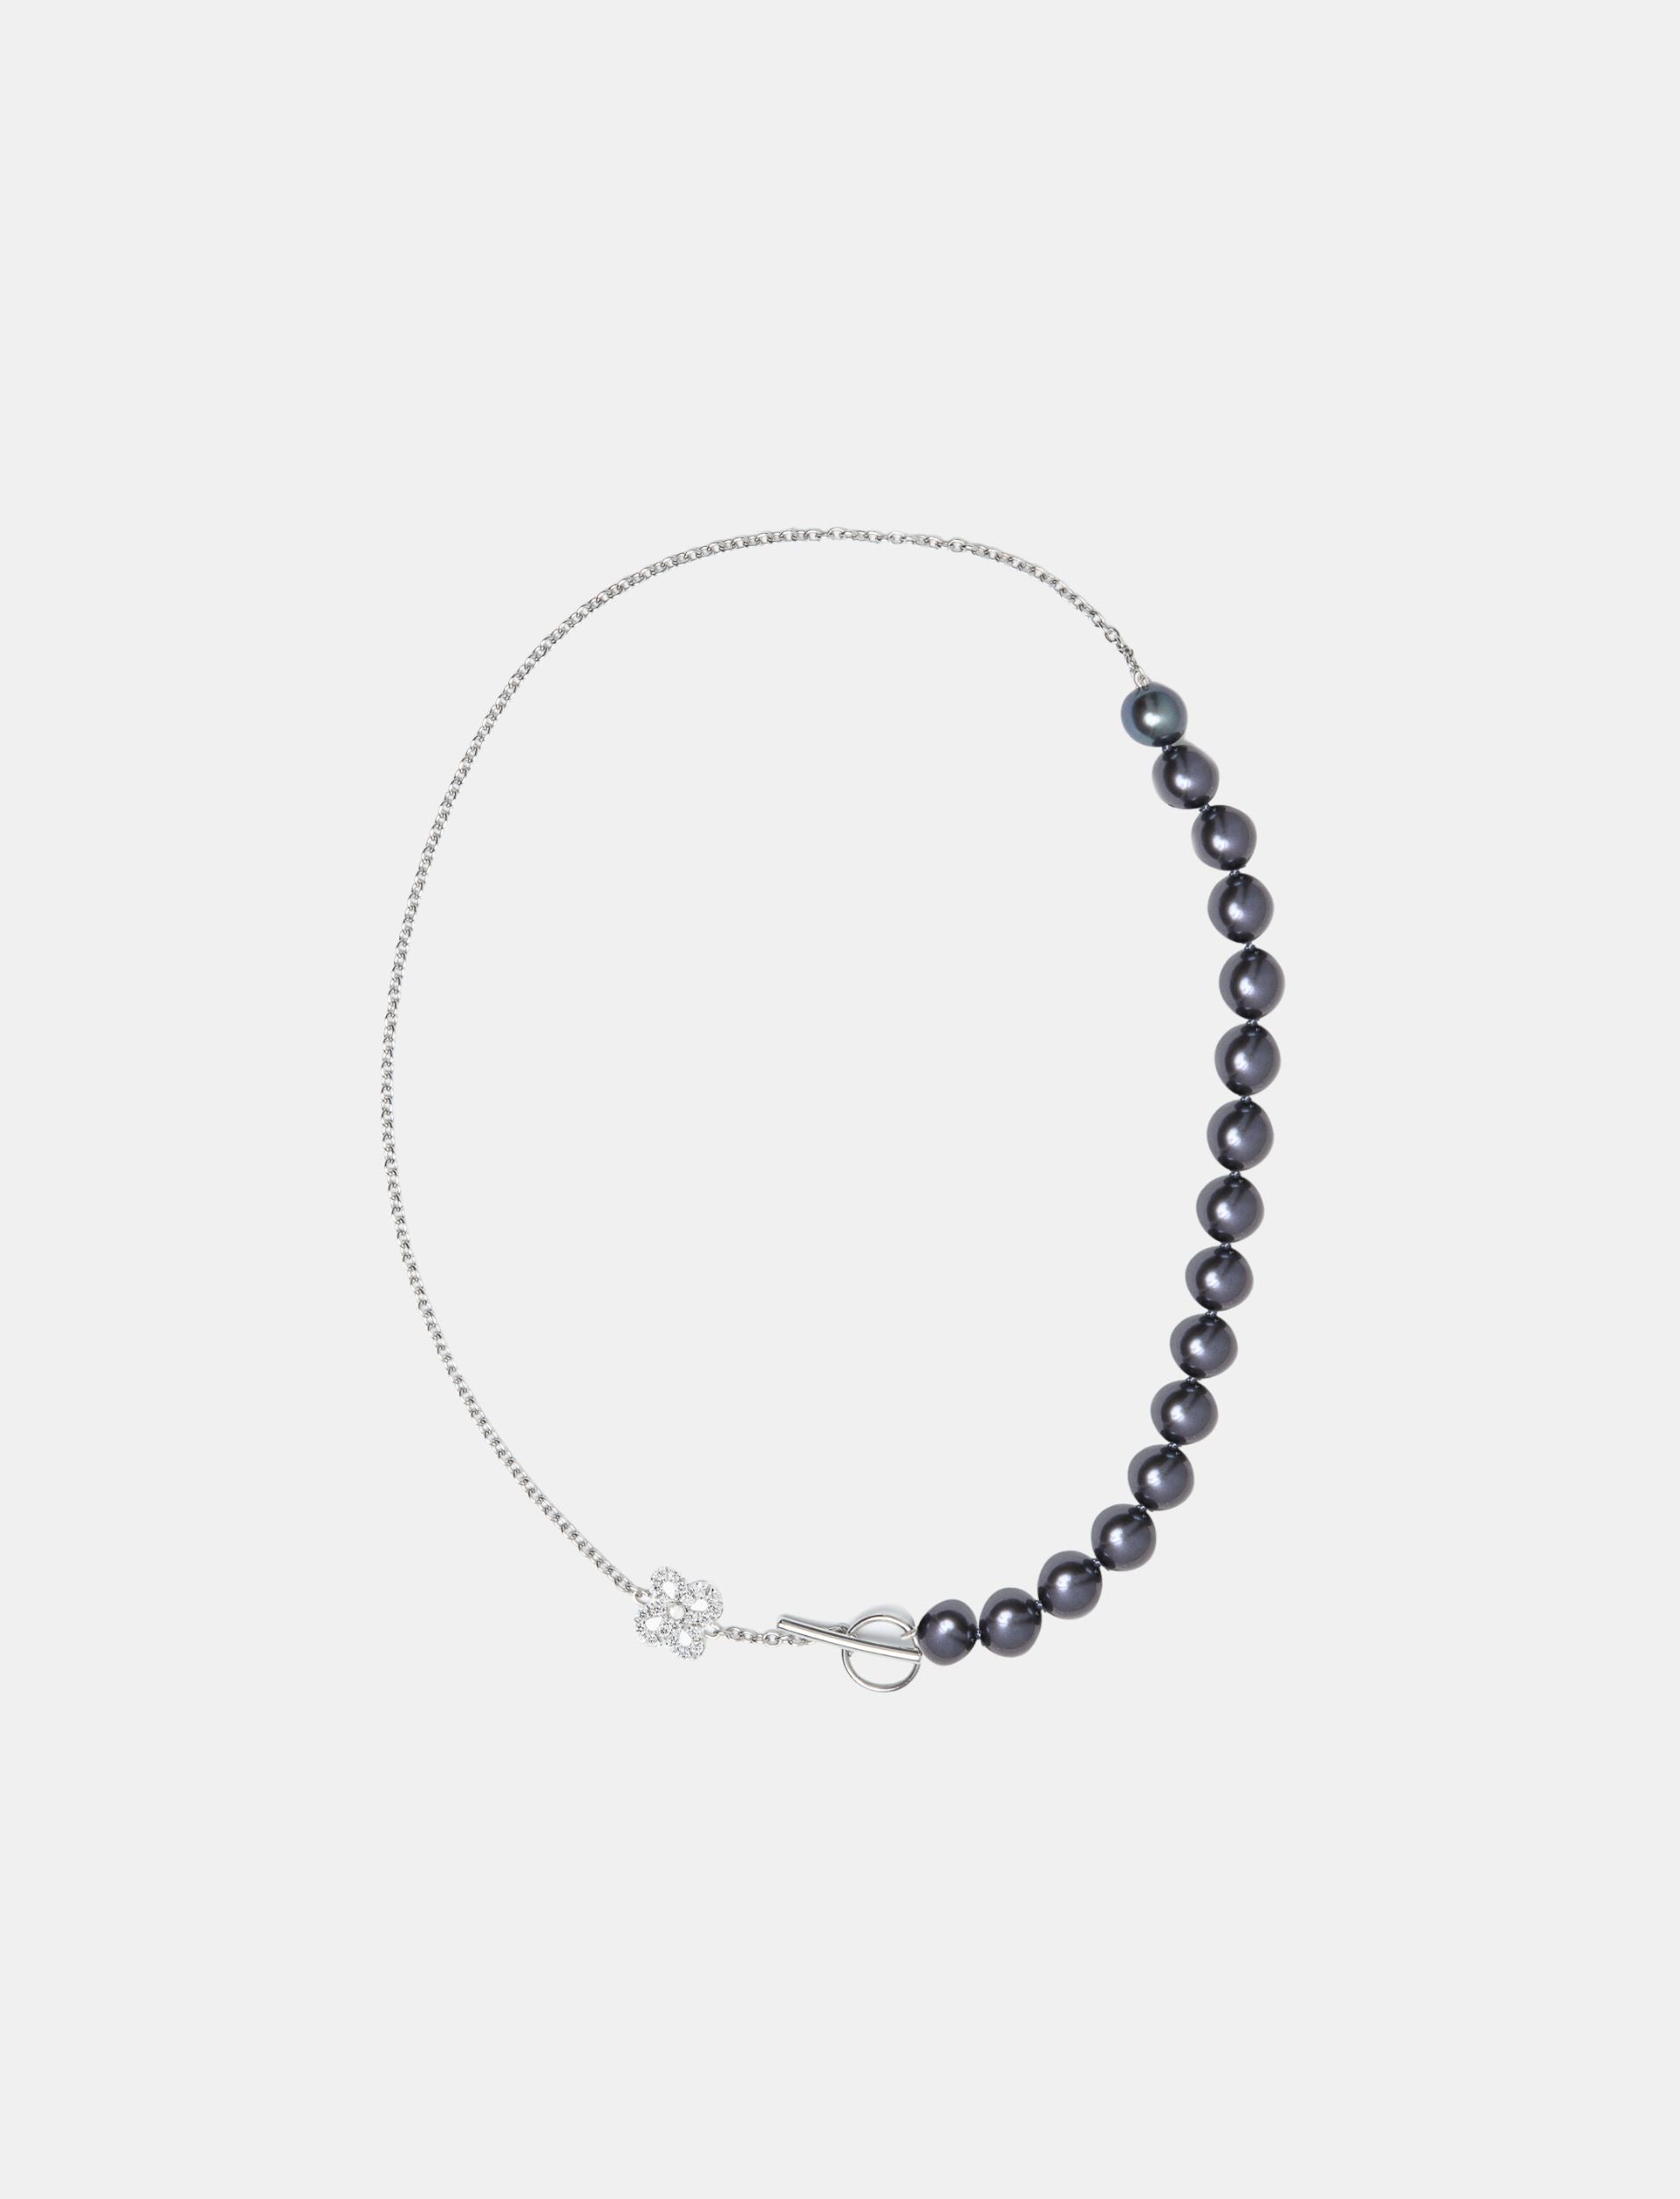 White Gold Diamond Choker Necklace With Black Pearls